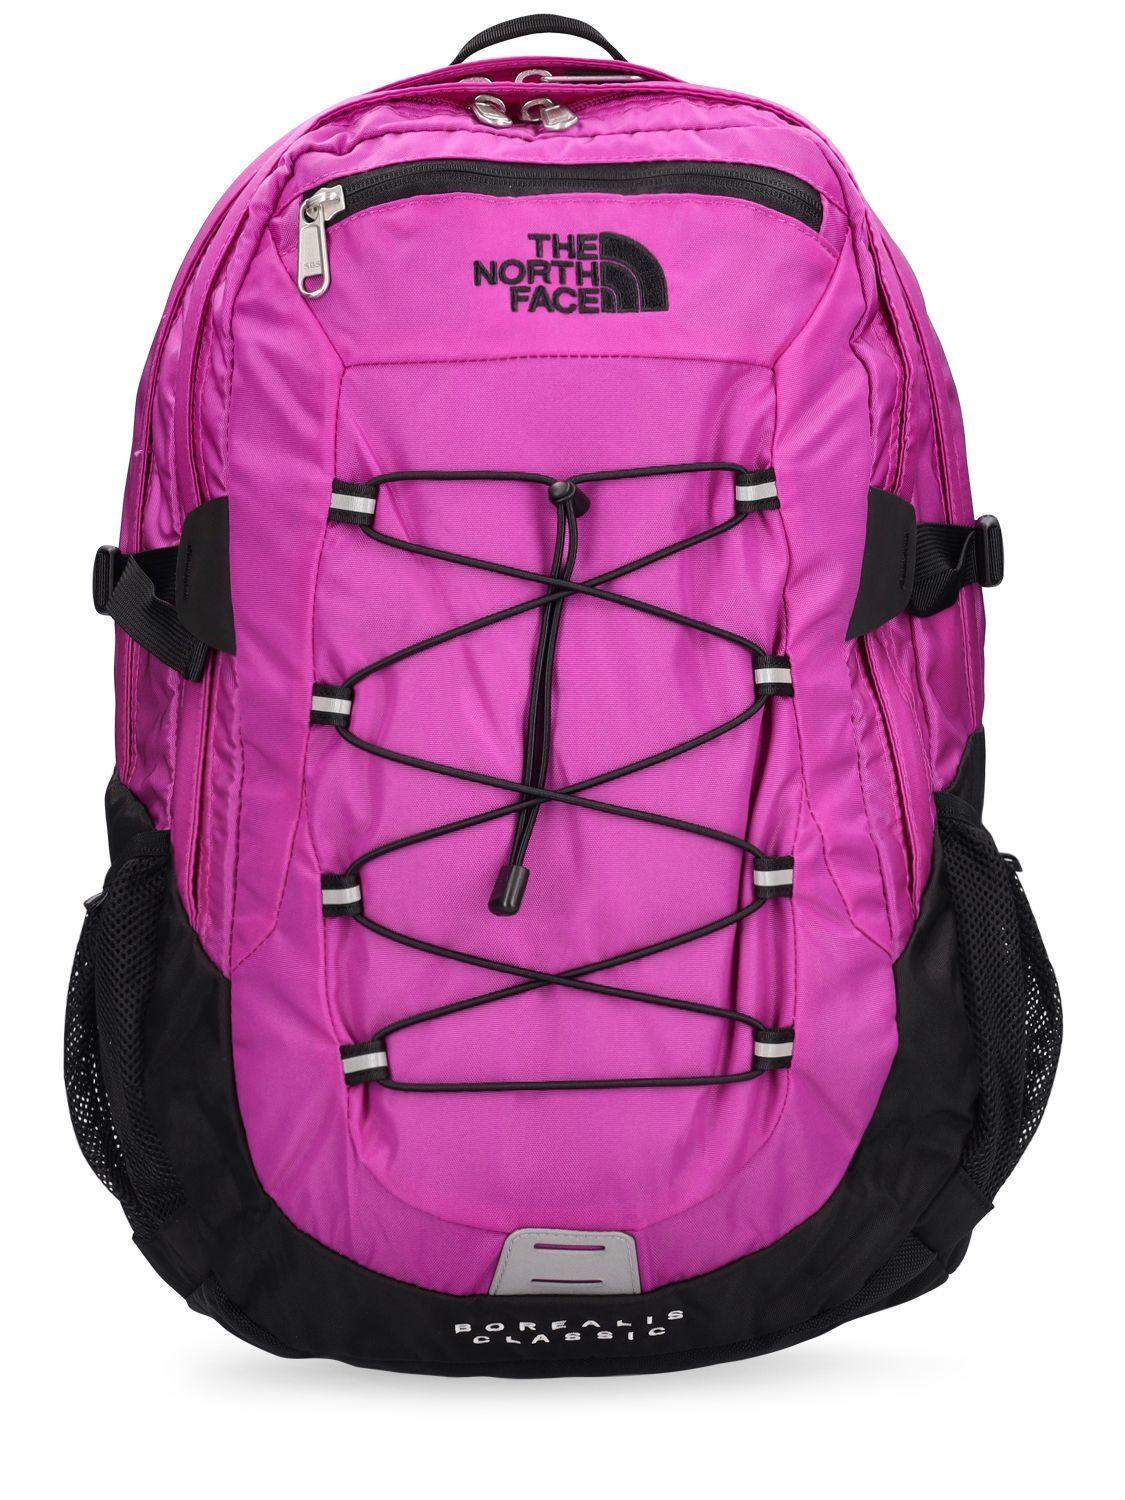 The North Face 29l Borealis Classic Nylon Backpack in Pink | Lyst